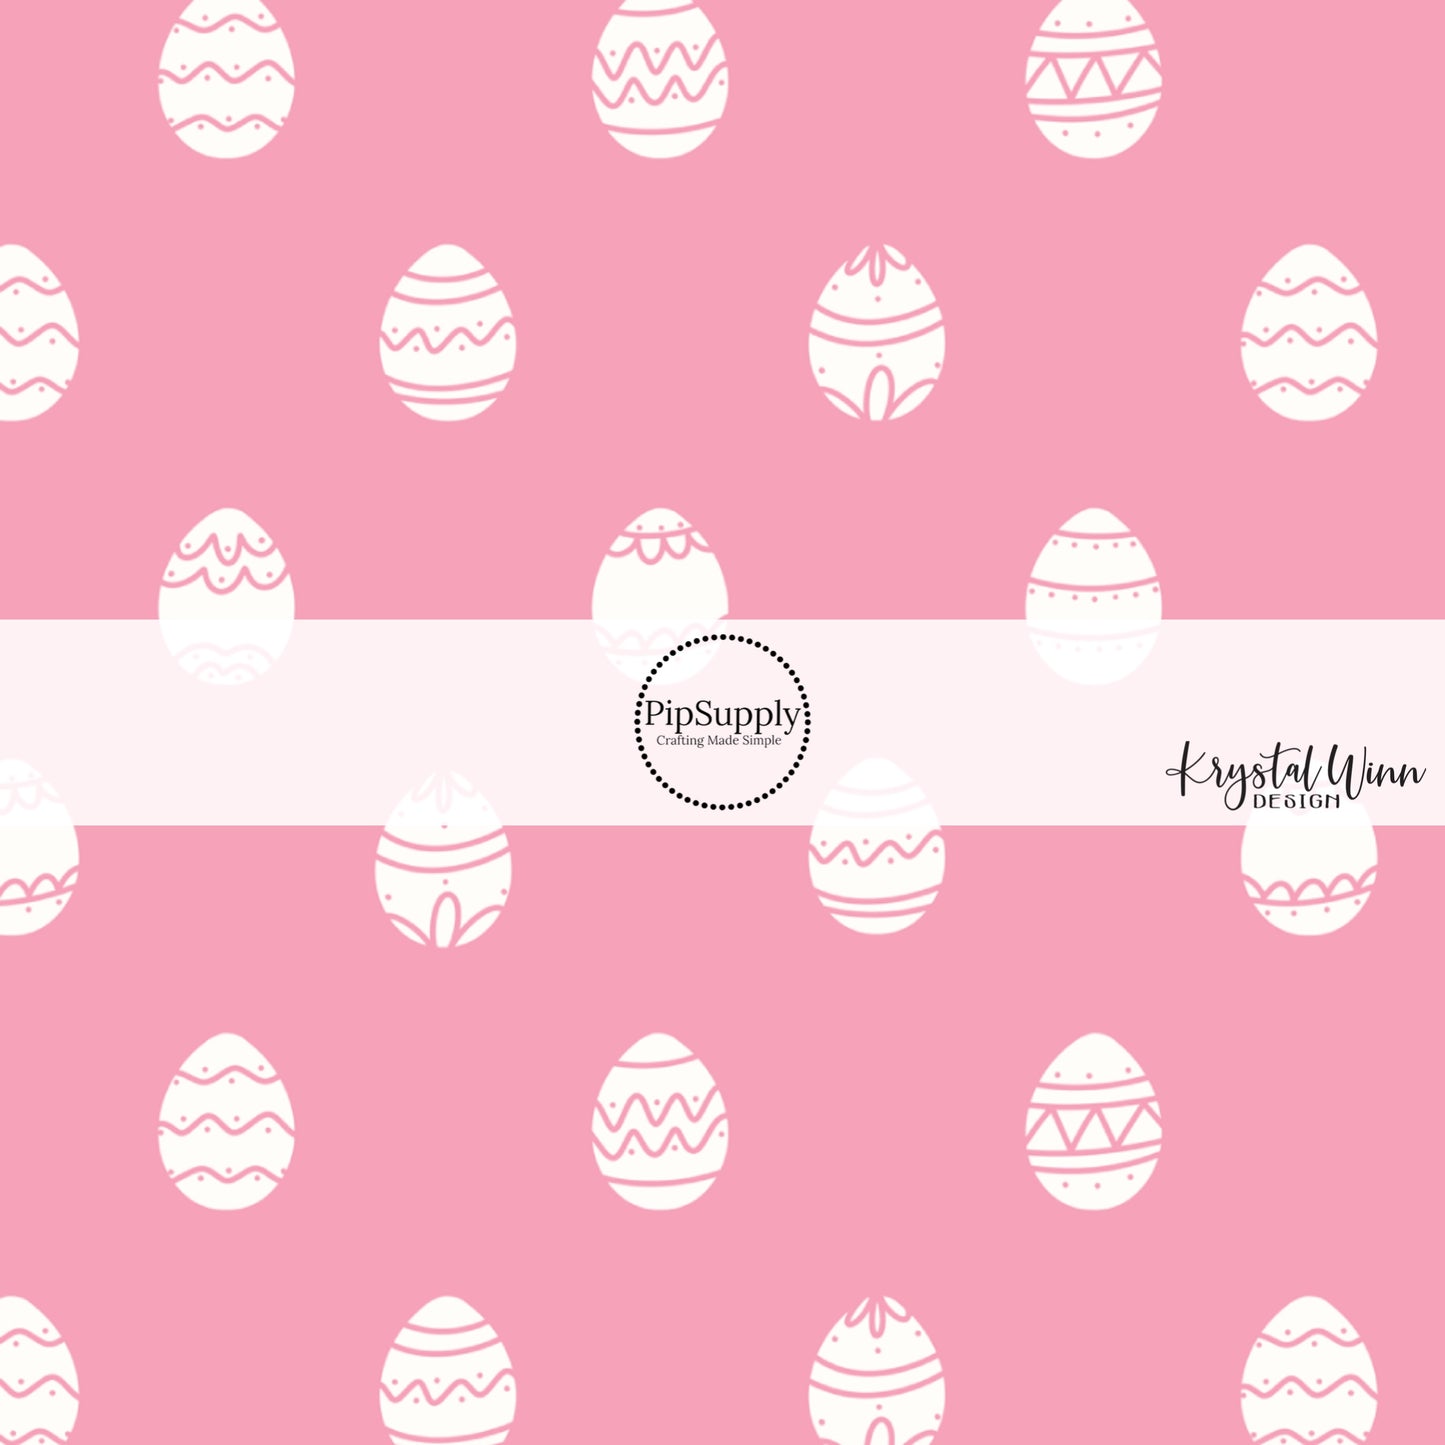 White eggs with polka dots and fun lines on a pink bow strip